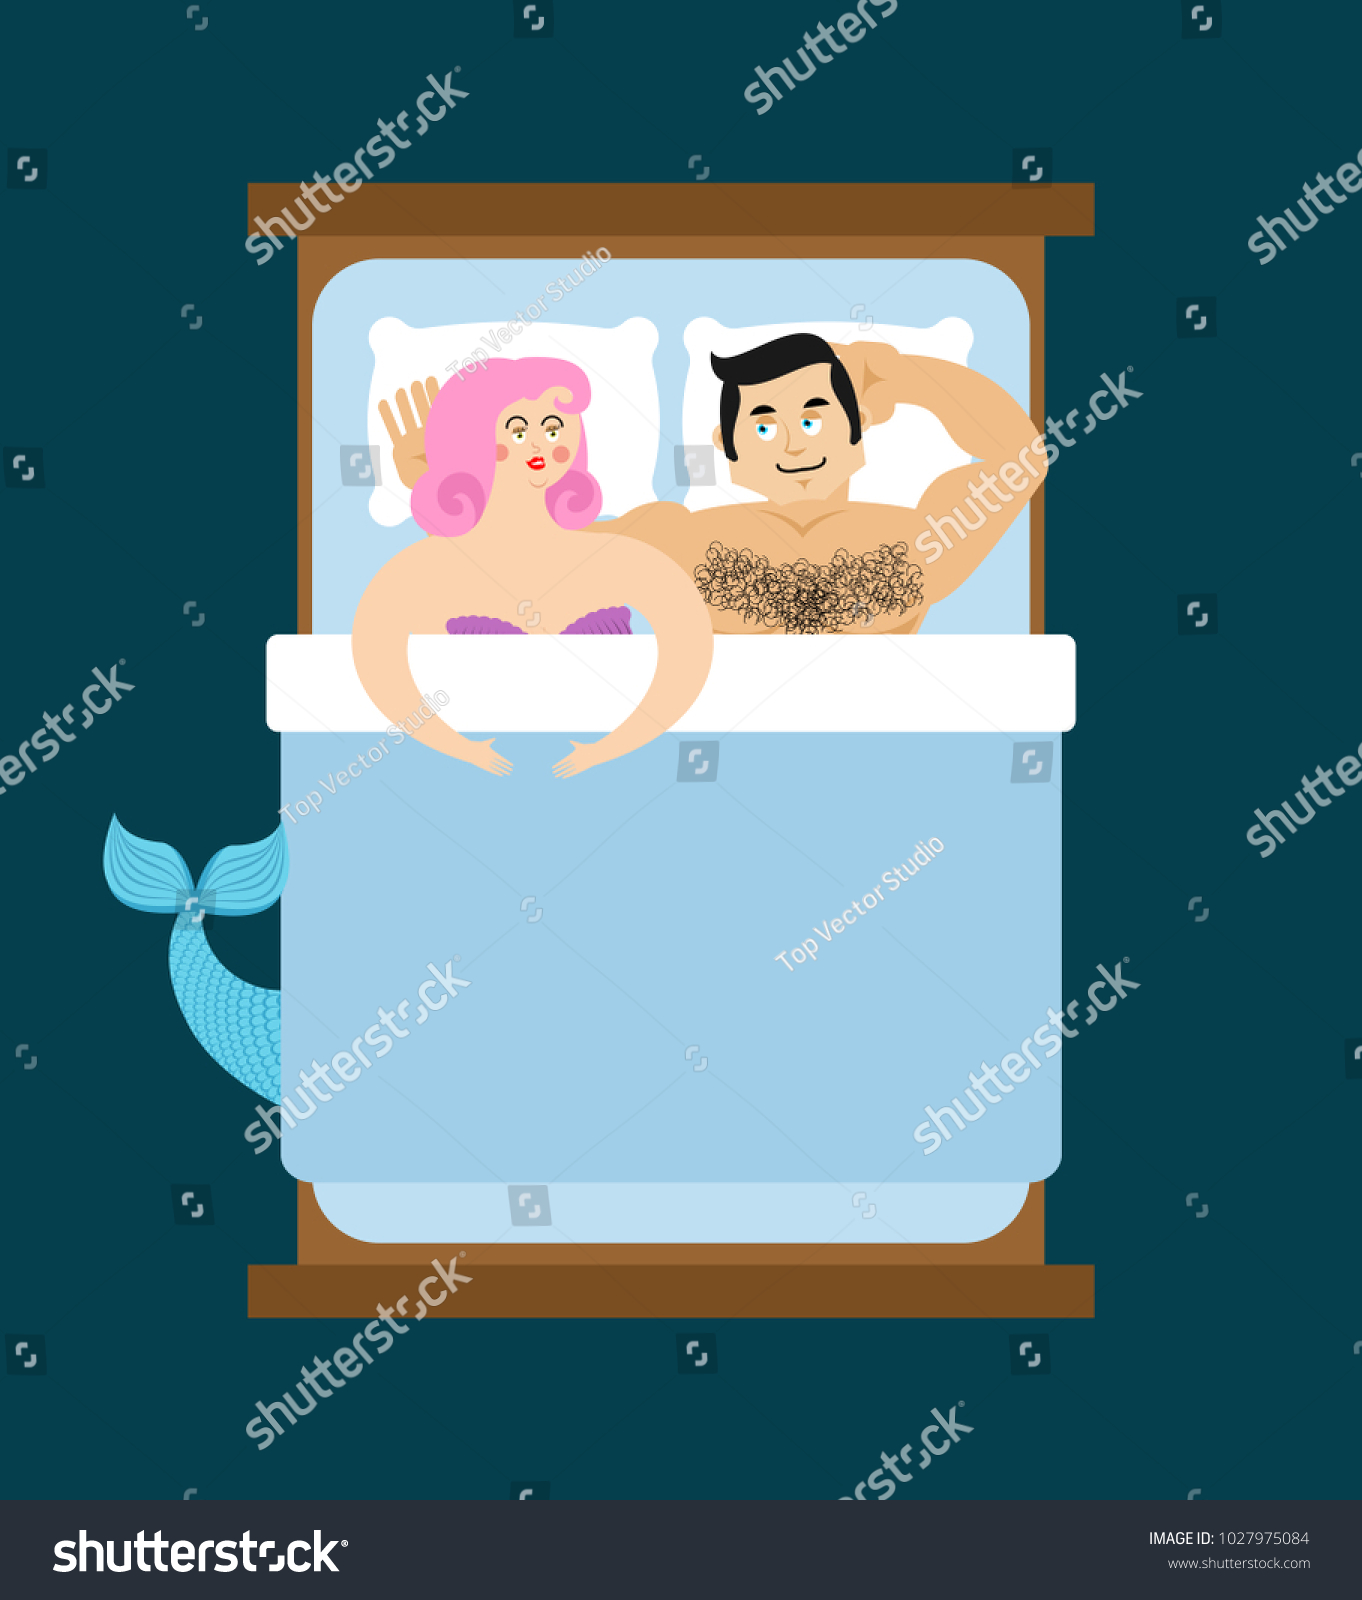 Mermaid Bed Lover Mythical Underwater Woman Stock Vector